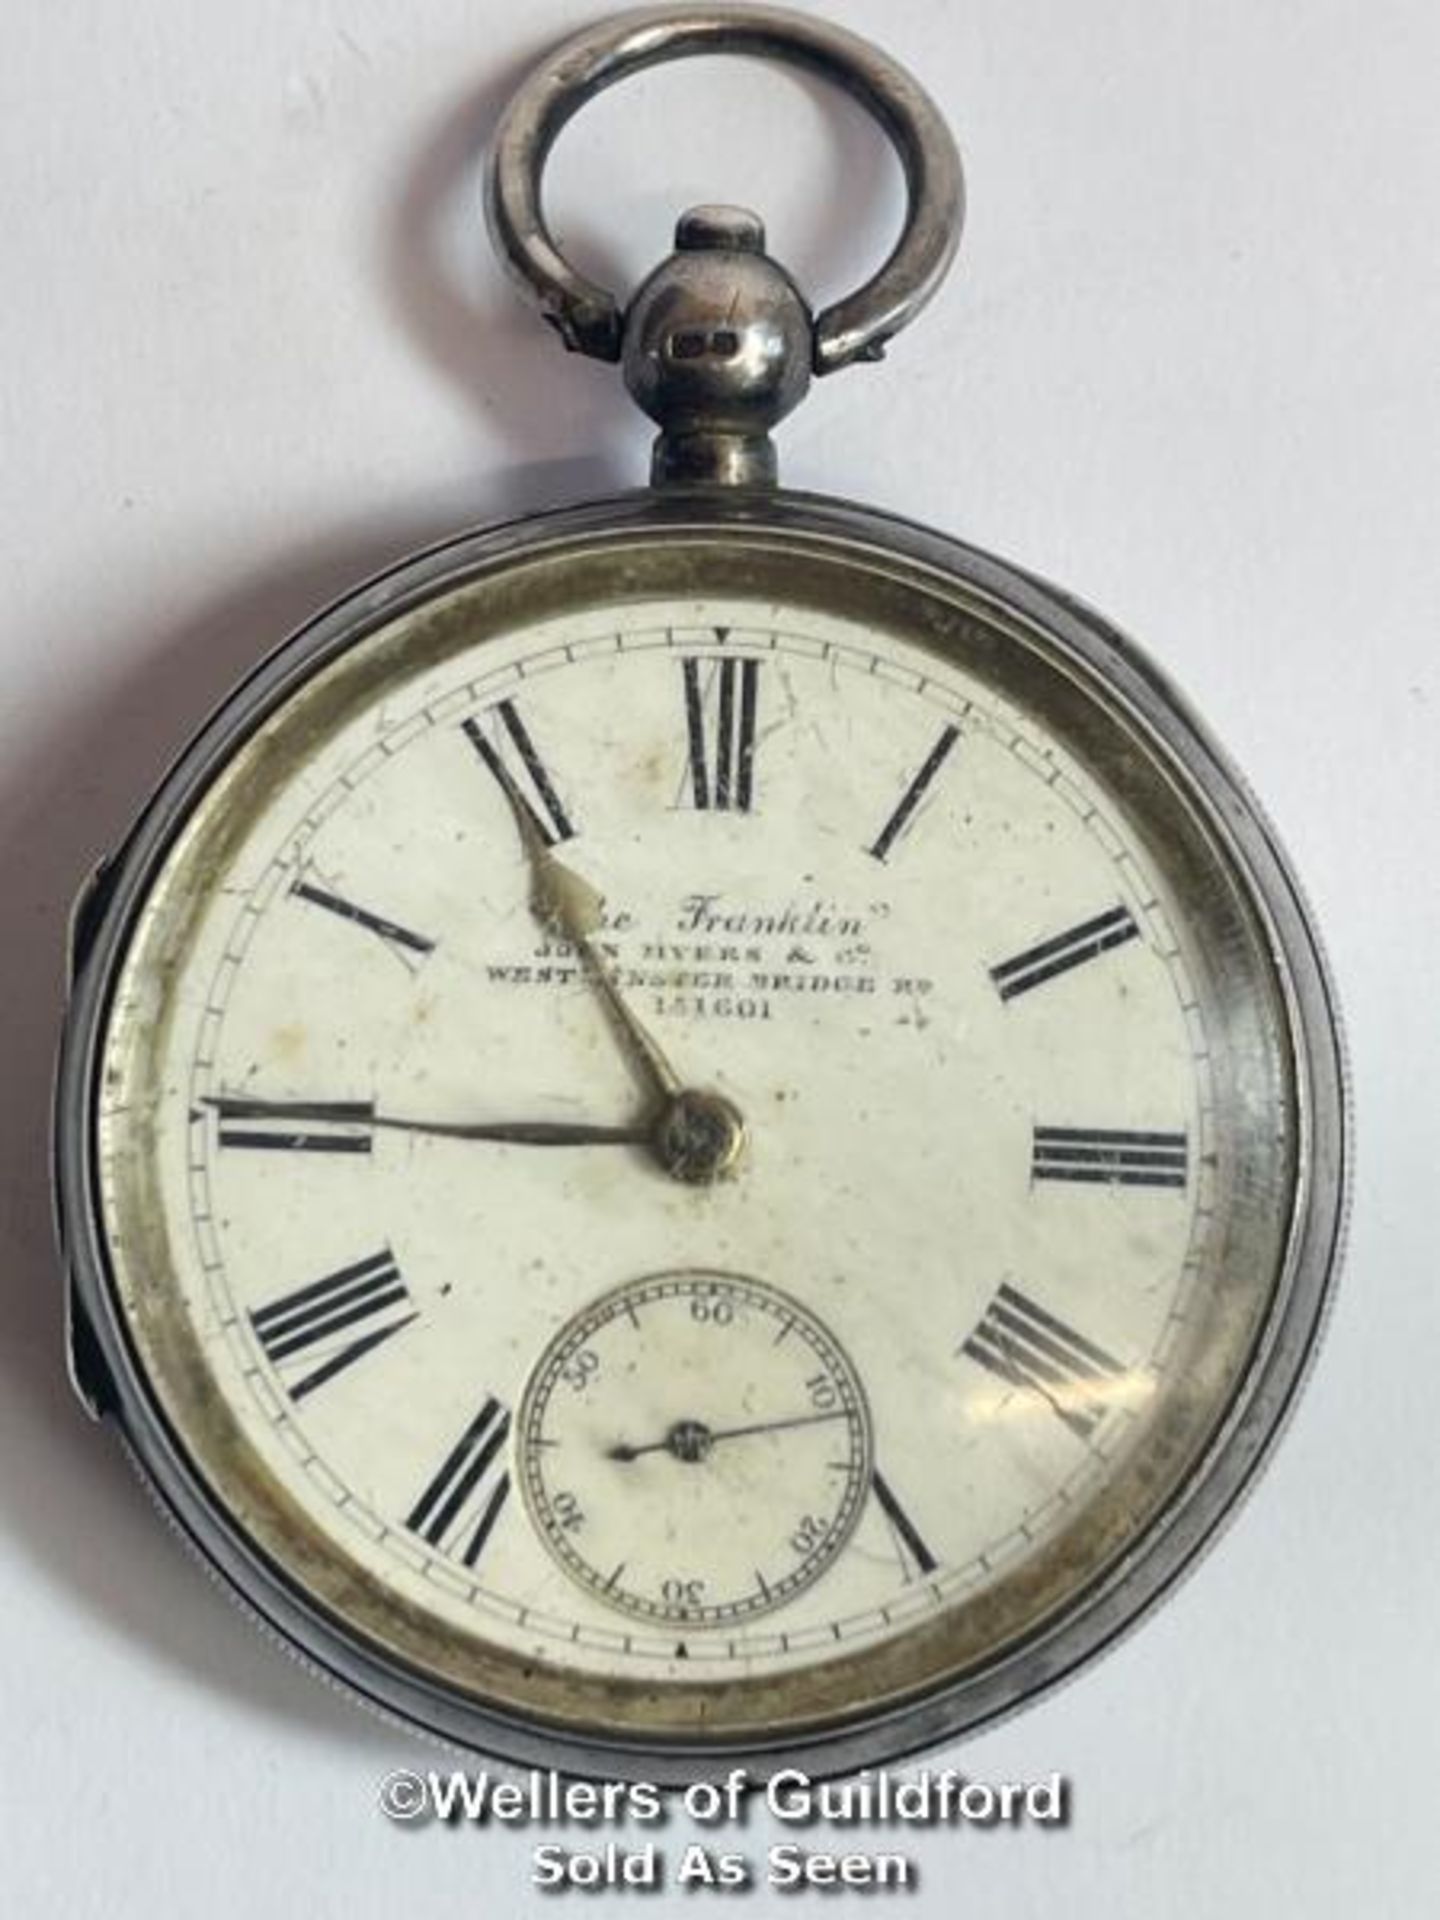 Hallmarked silver cased pocket watch "The Franklin" by John Myers & Co. Westminster Bridge Rd no. - Image 2 of 8